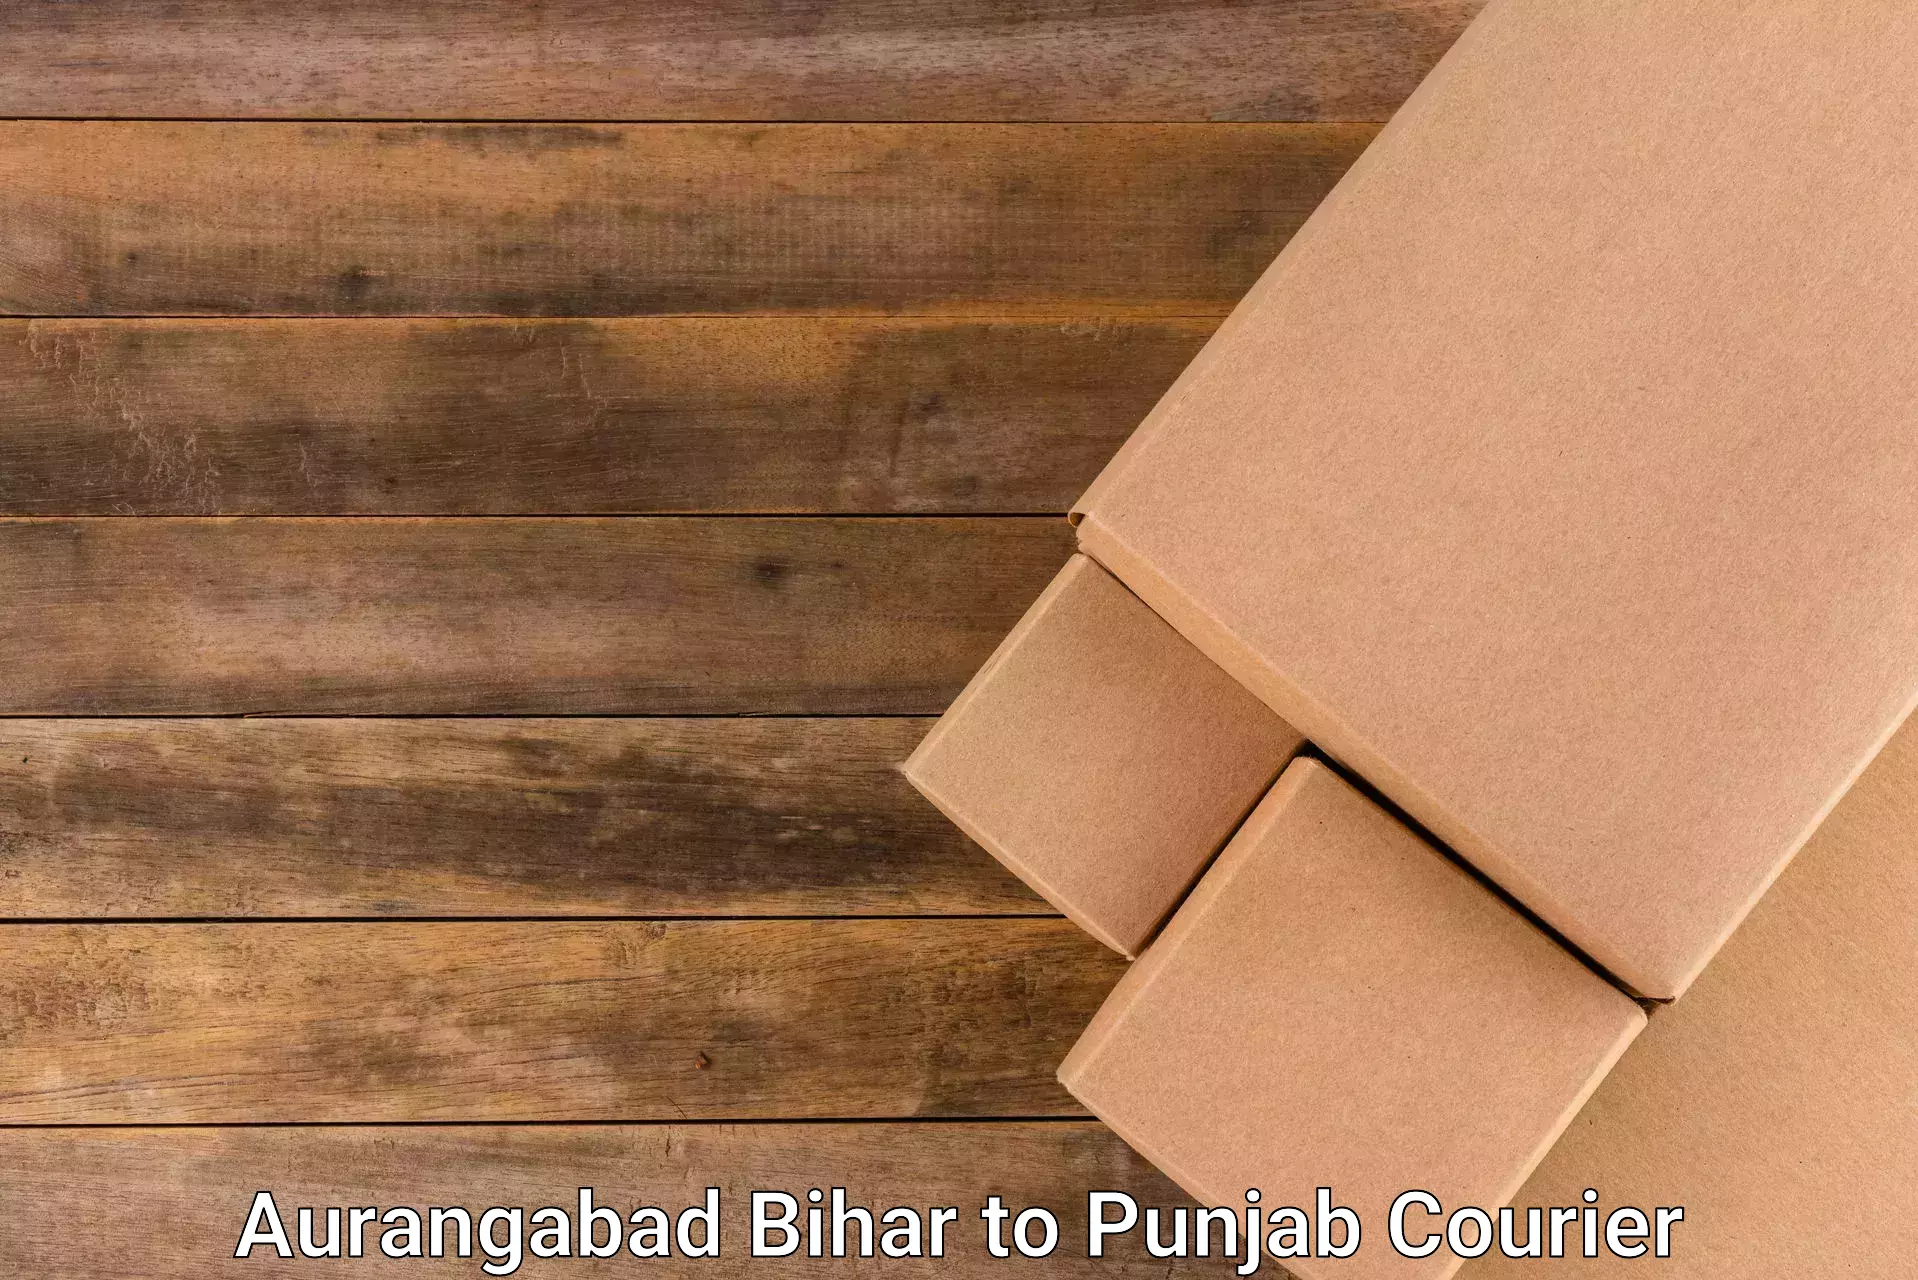 Dynamic courier operations Aurangabad Bihar to Begowal